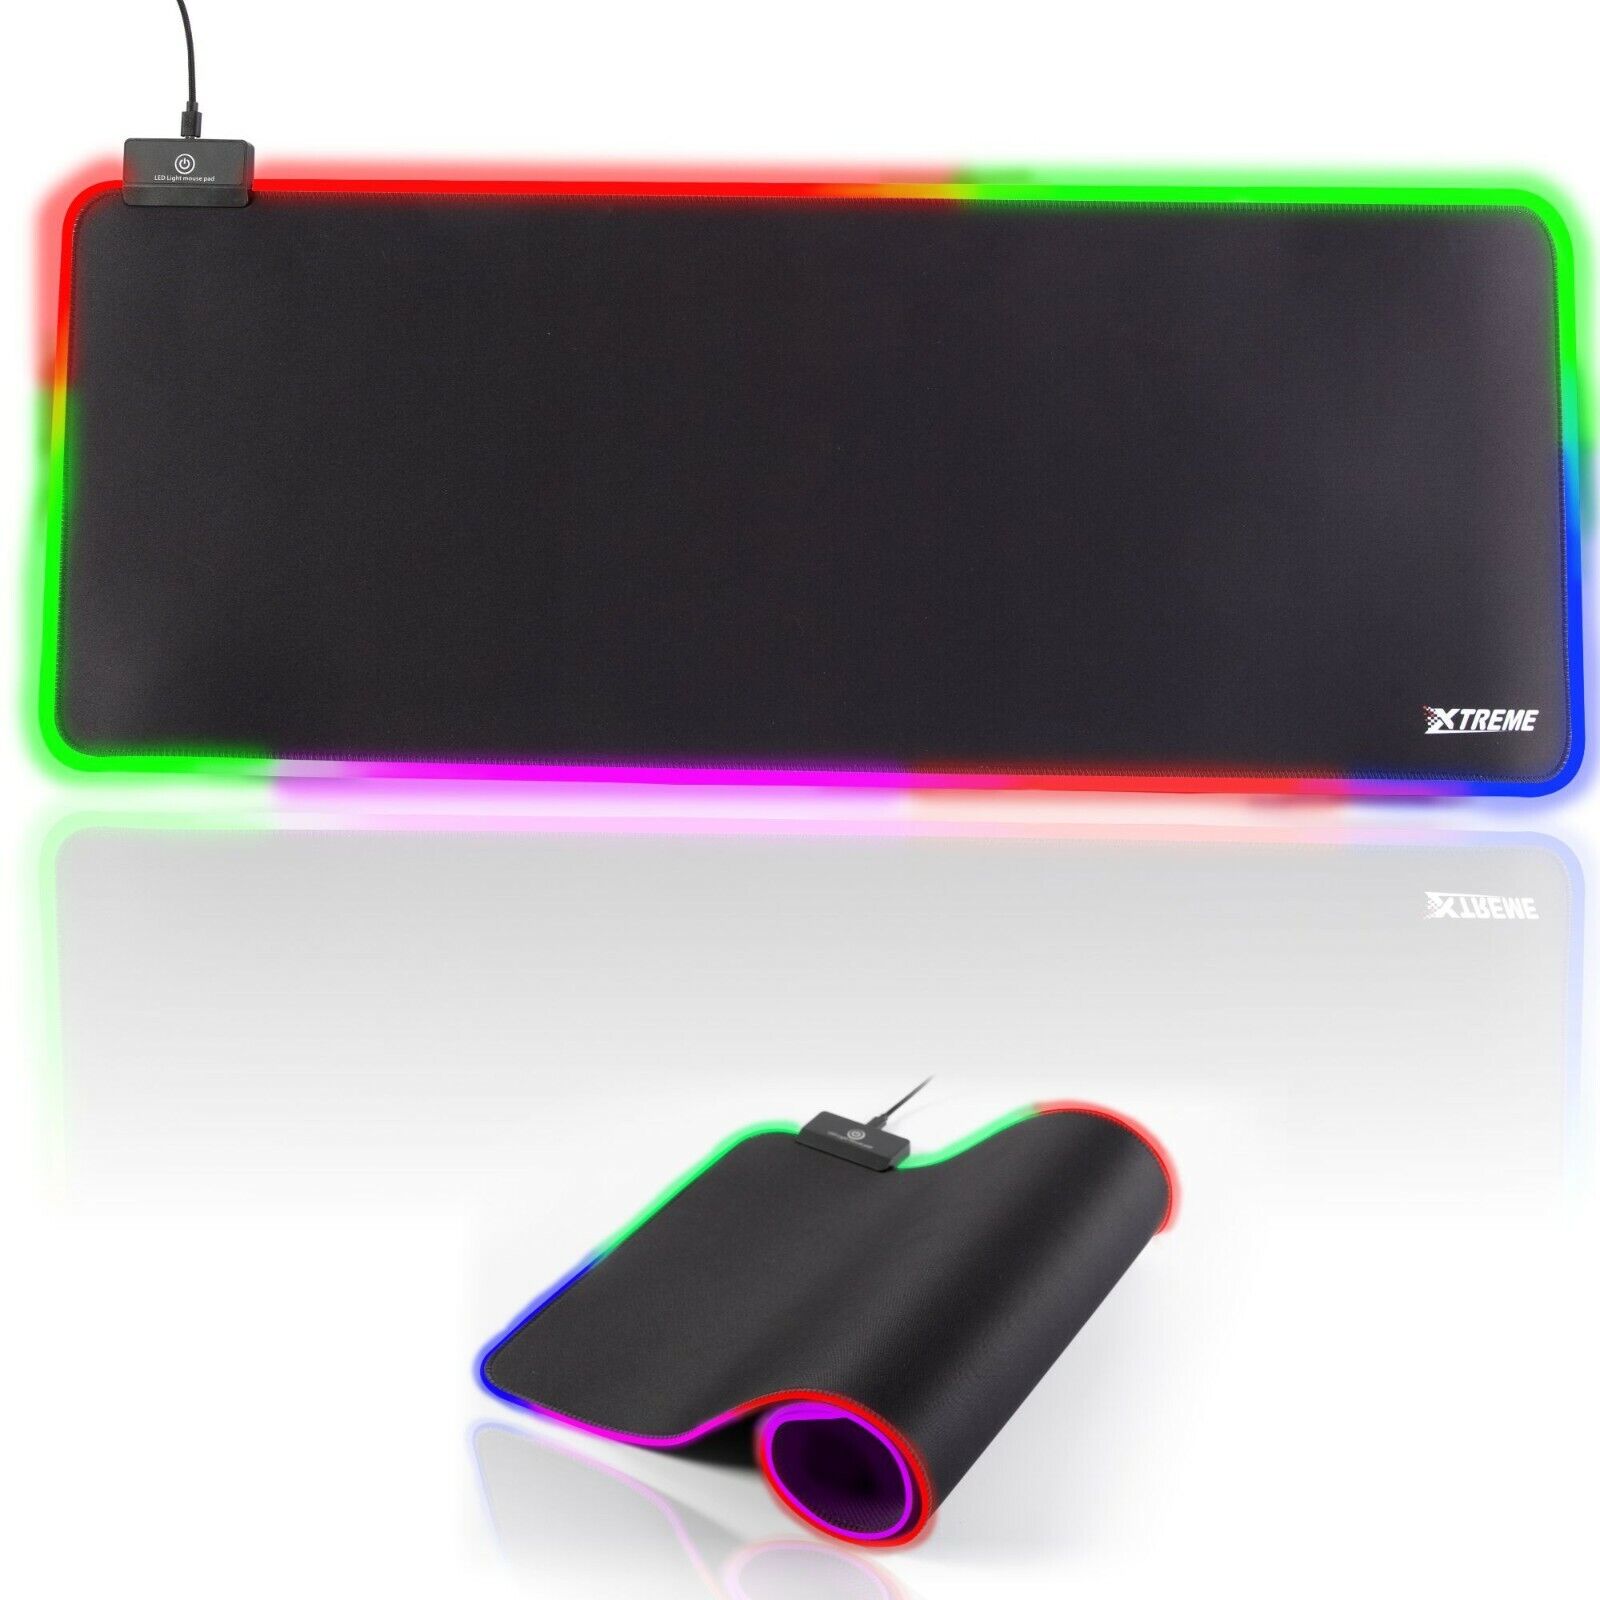 XTREME Large RGB Gaming LED Mouse Mat Pad Wide Thick Soft Non-Slip Mousepad